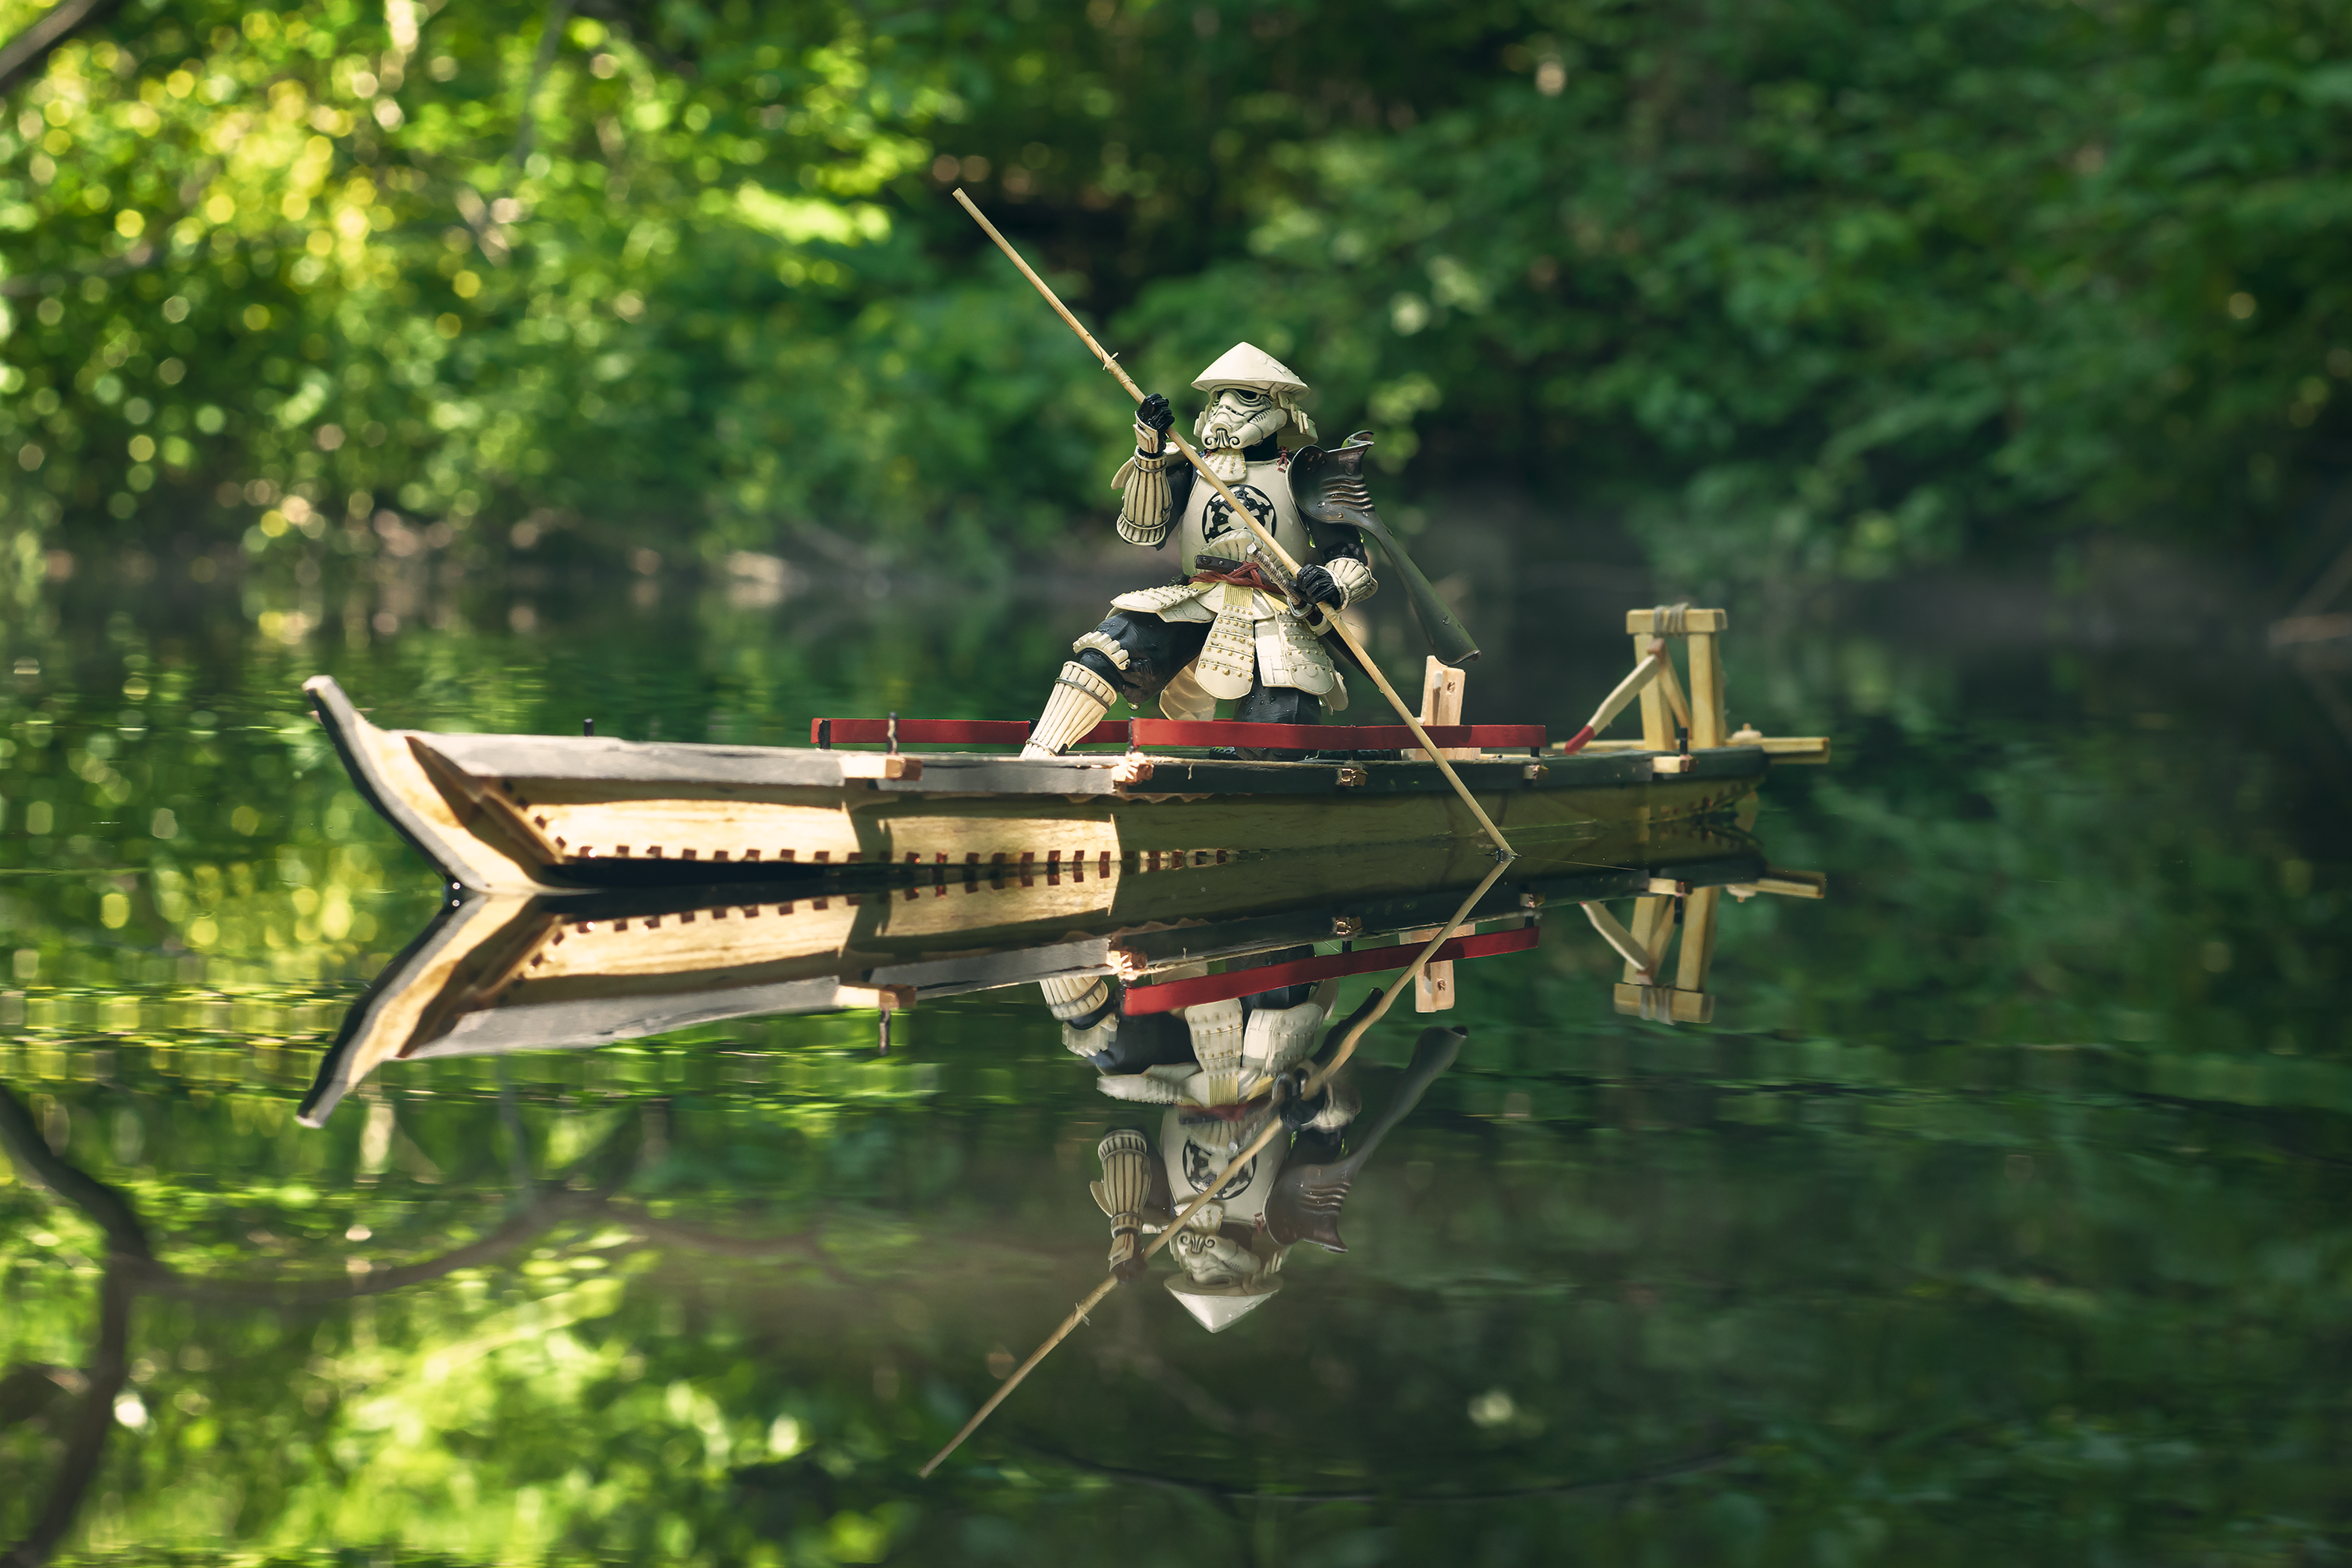 Matthew Cohen Brings Out His Inner Child in Impressive Toy Photography